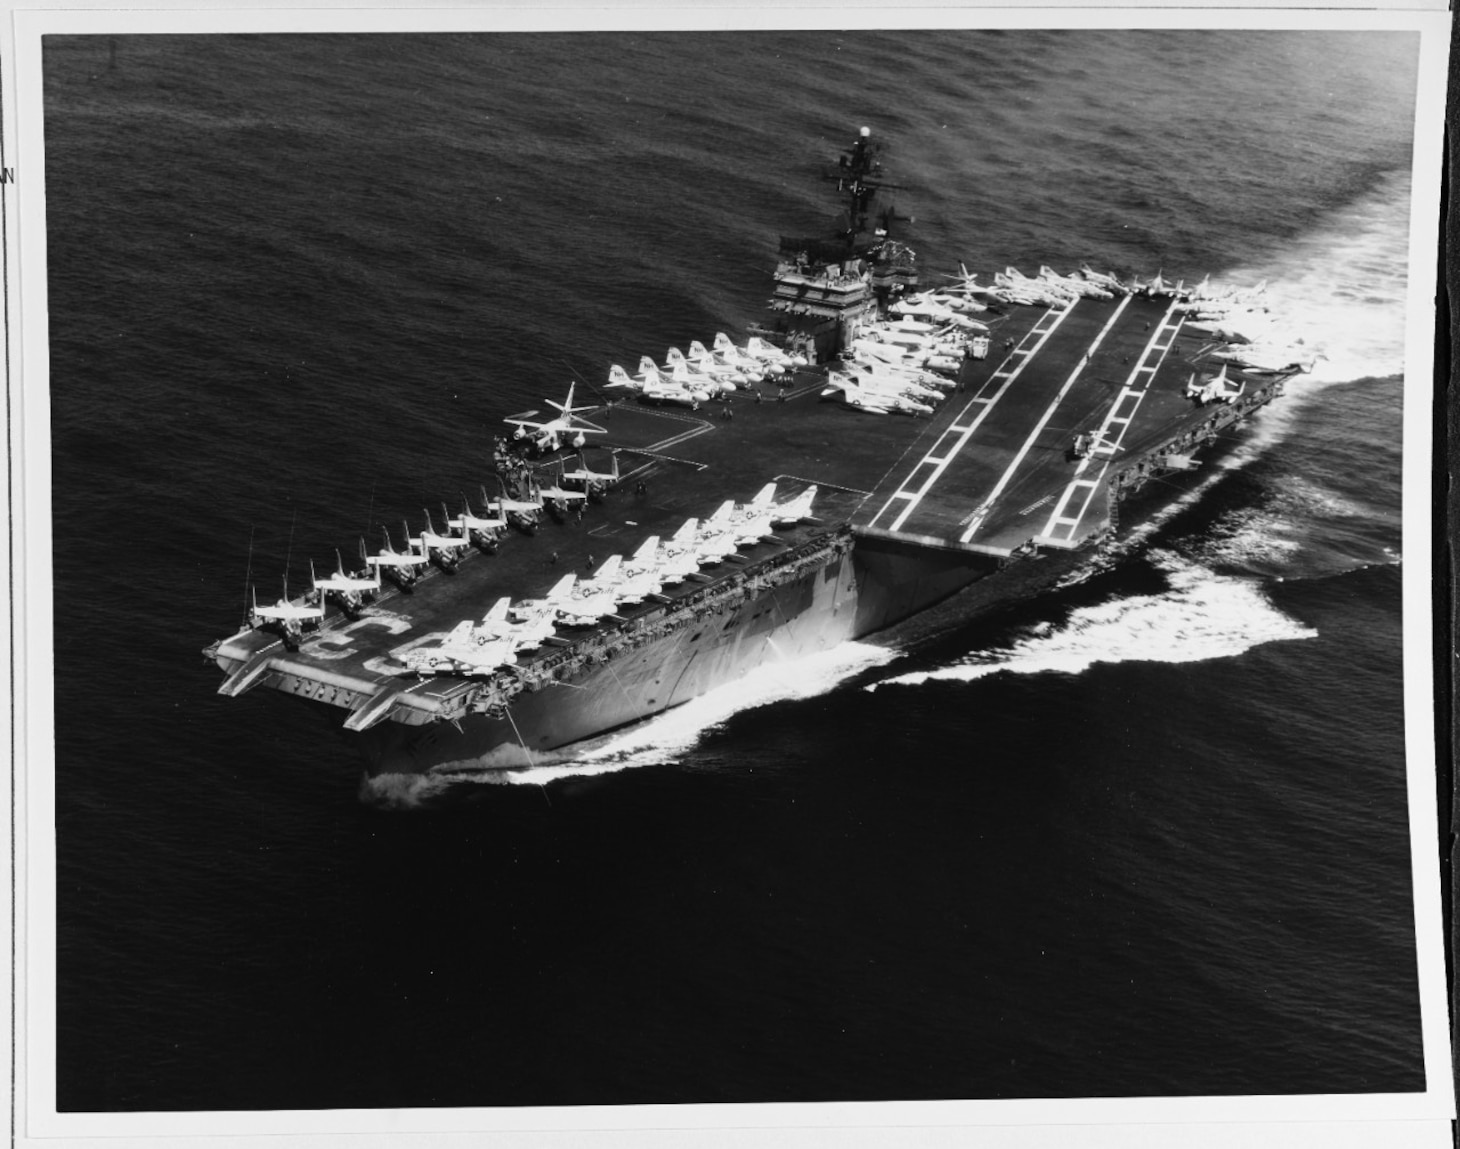 Attack aircraft carrier USS KITTY HAWK (CVA-63) steams the Pacific Ocean 21 July 1969. Photographed by Photographer's Mate First Class D.B. Wood. (USN 1140842)